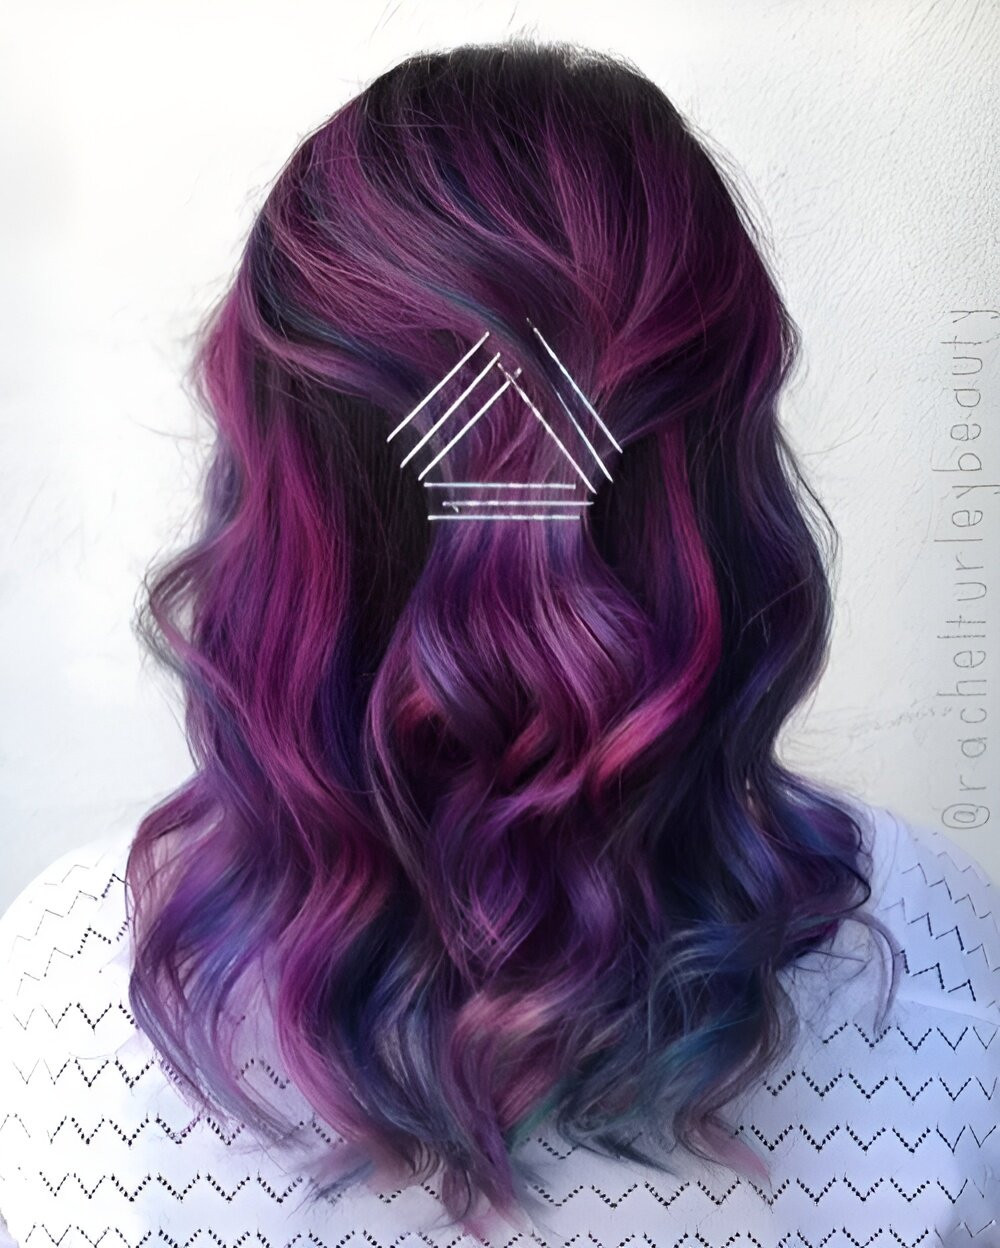 Become A Model With These 27 Gorgeous Plum Hair Color Ideas - 221